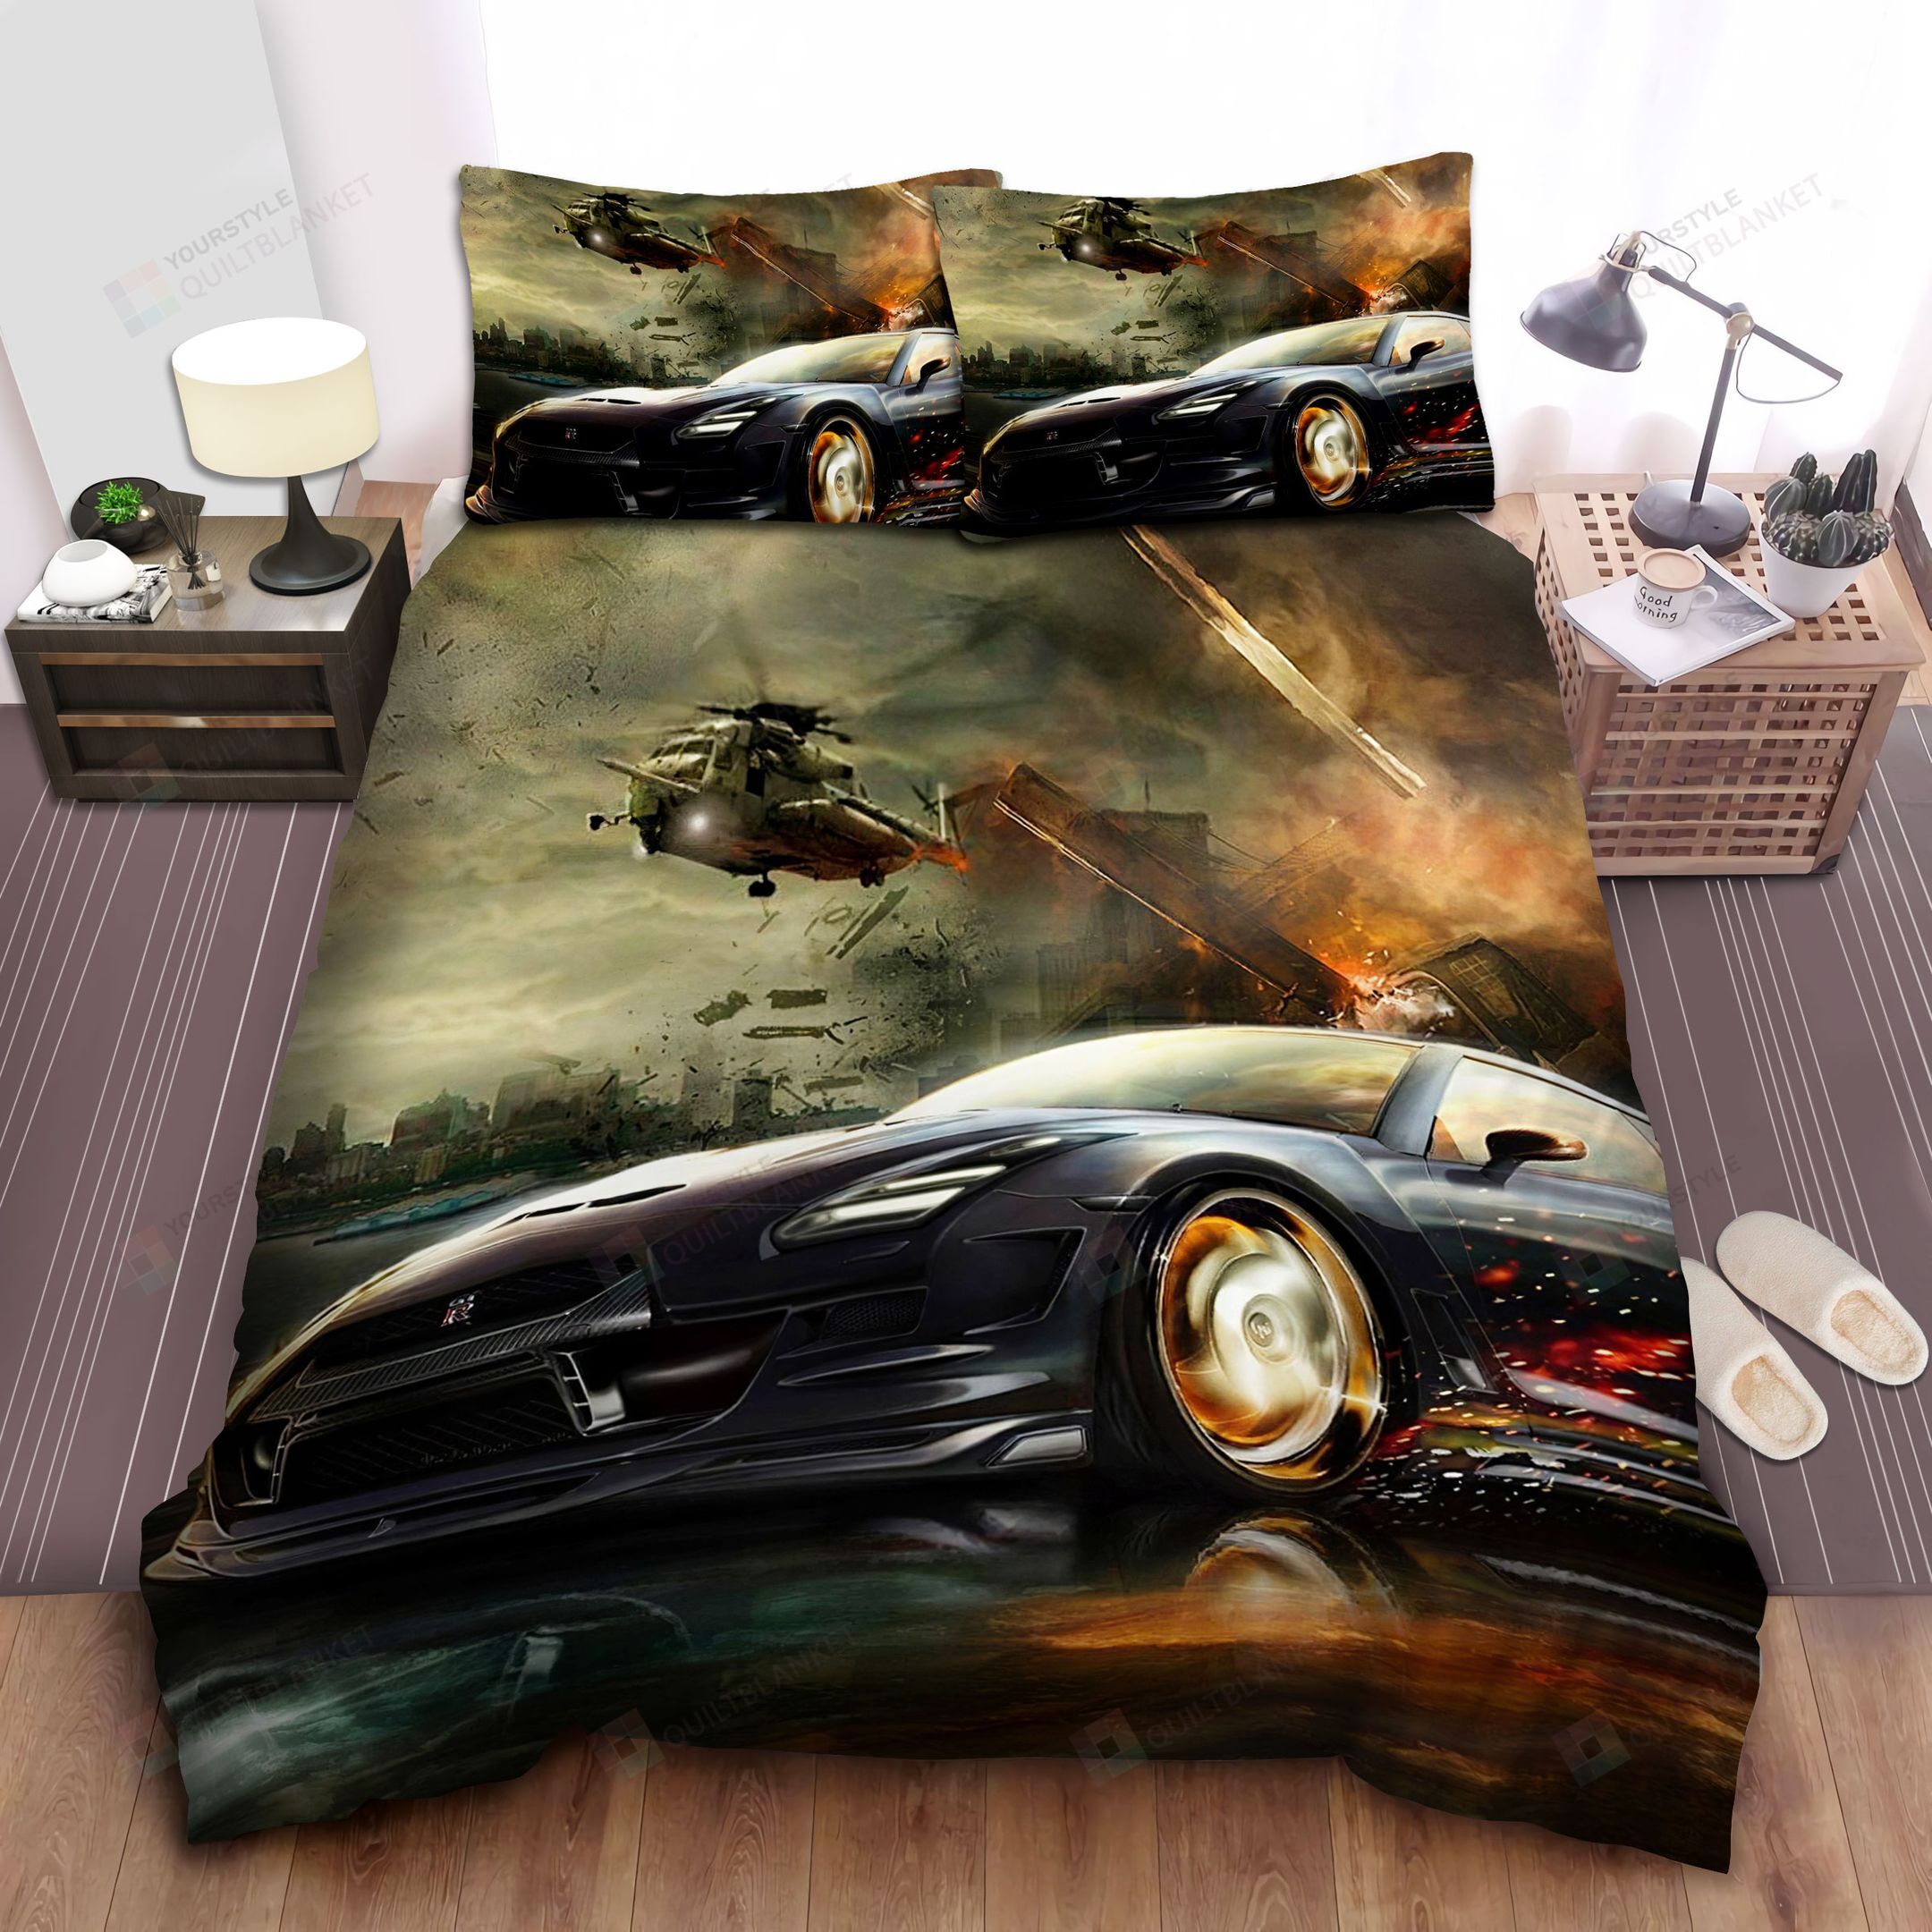 Need For Speed Race Car & Helicopter In Tornado Bed Sheets Spread Comforter Duvet Cover Bedding Sets